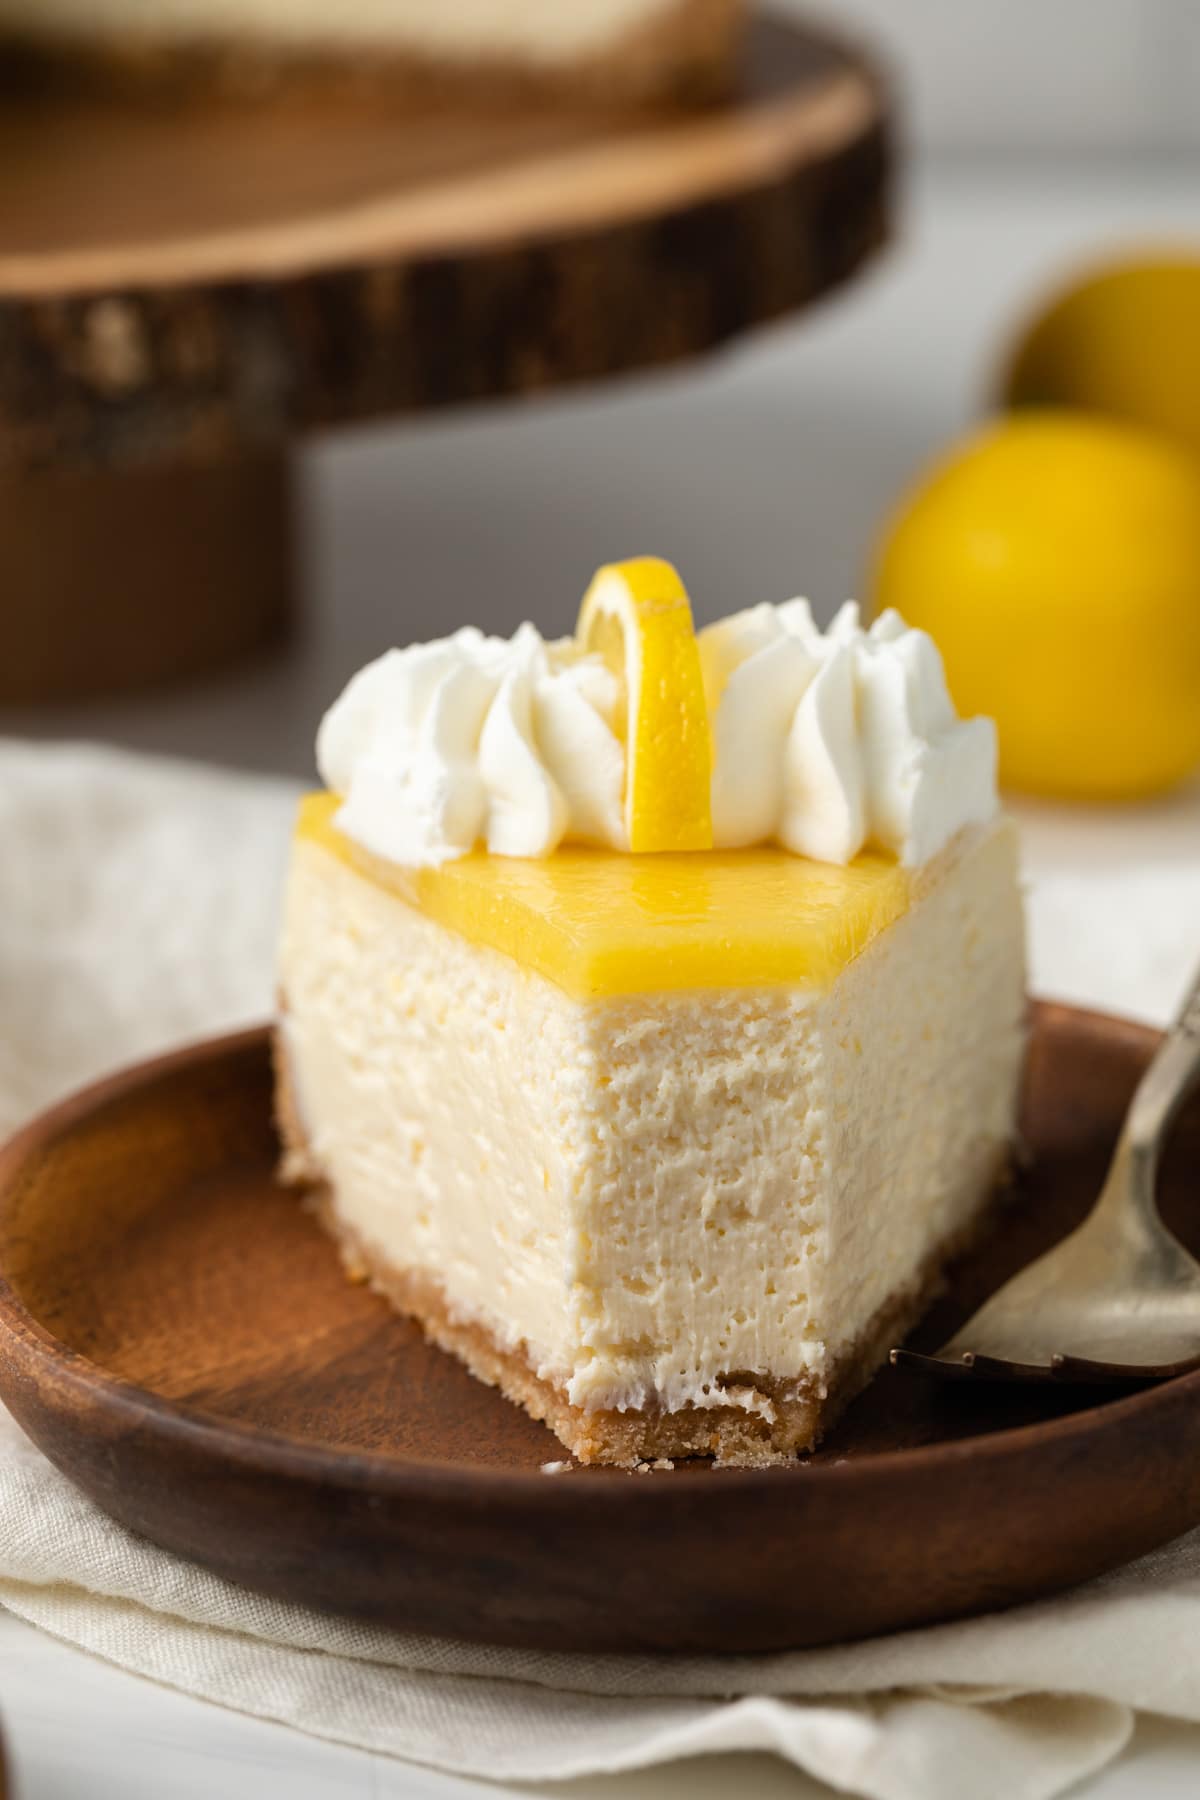 Slice of lemon cheesecake with a bite taken out.